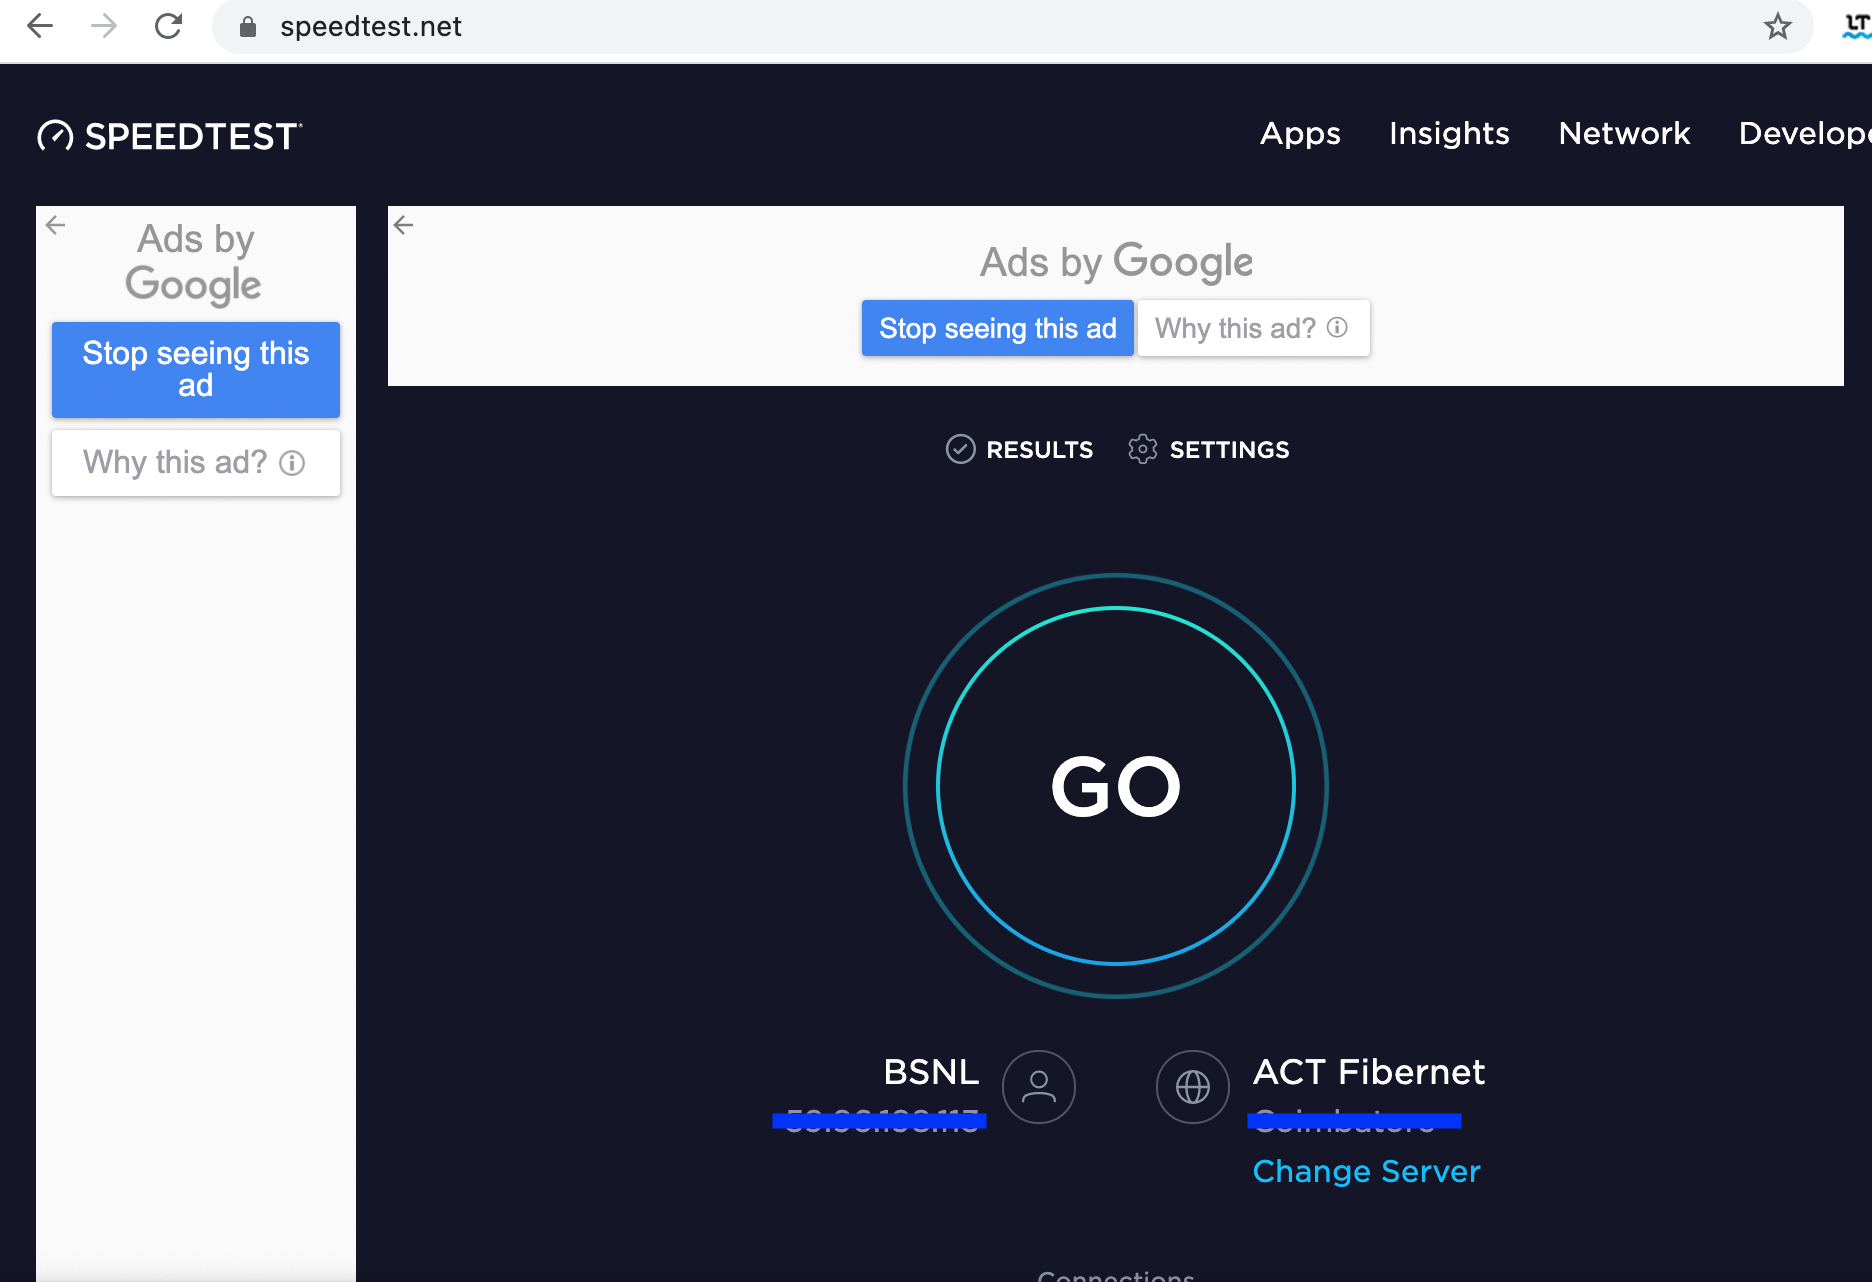 Run a quick internet speed test on speedtest.net to check the strength of your connection